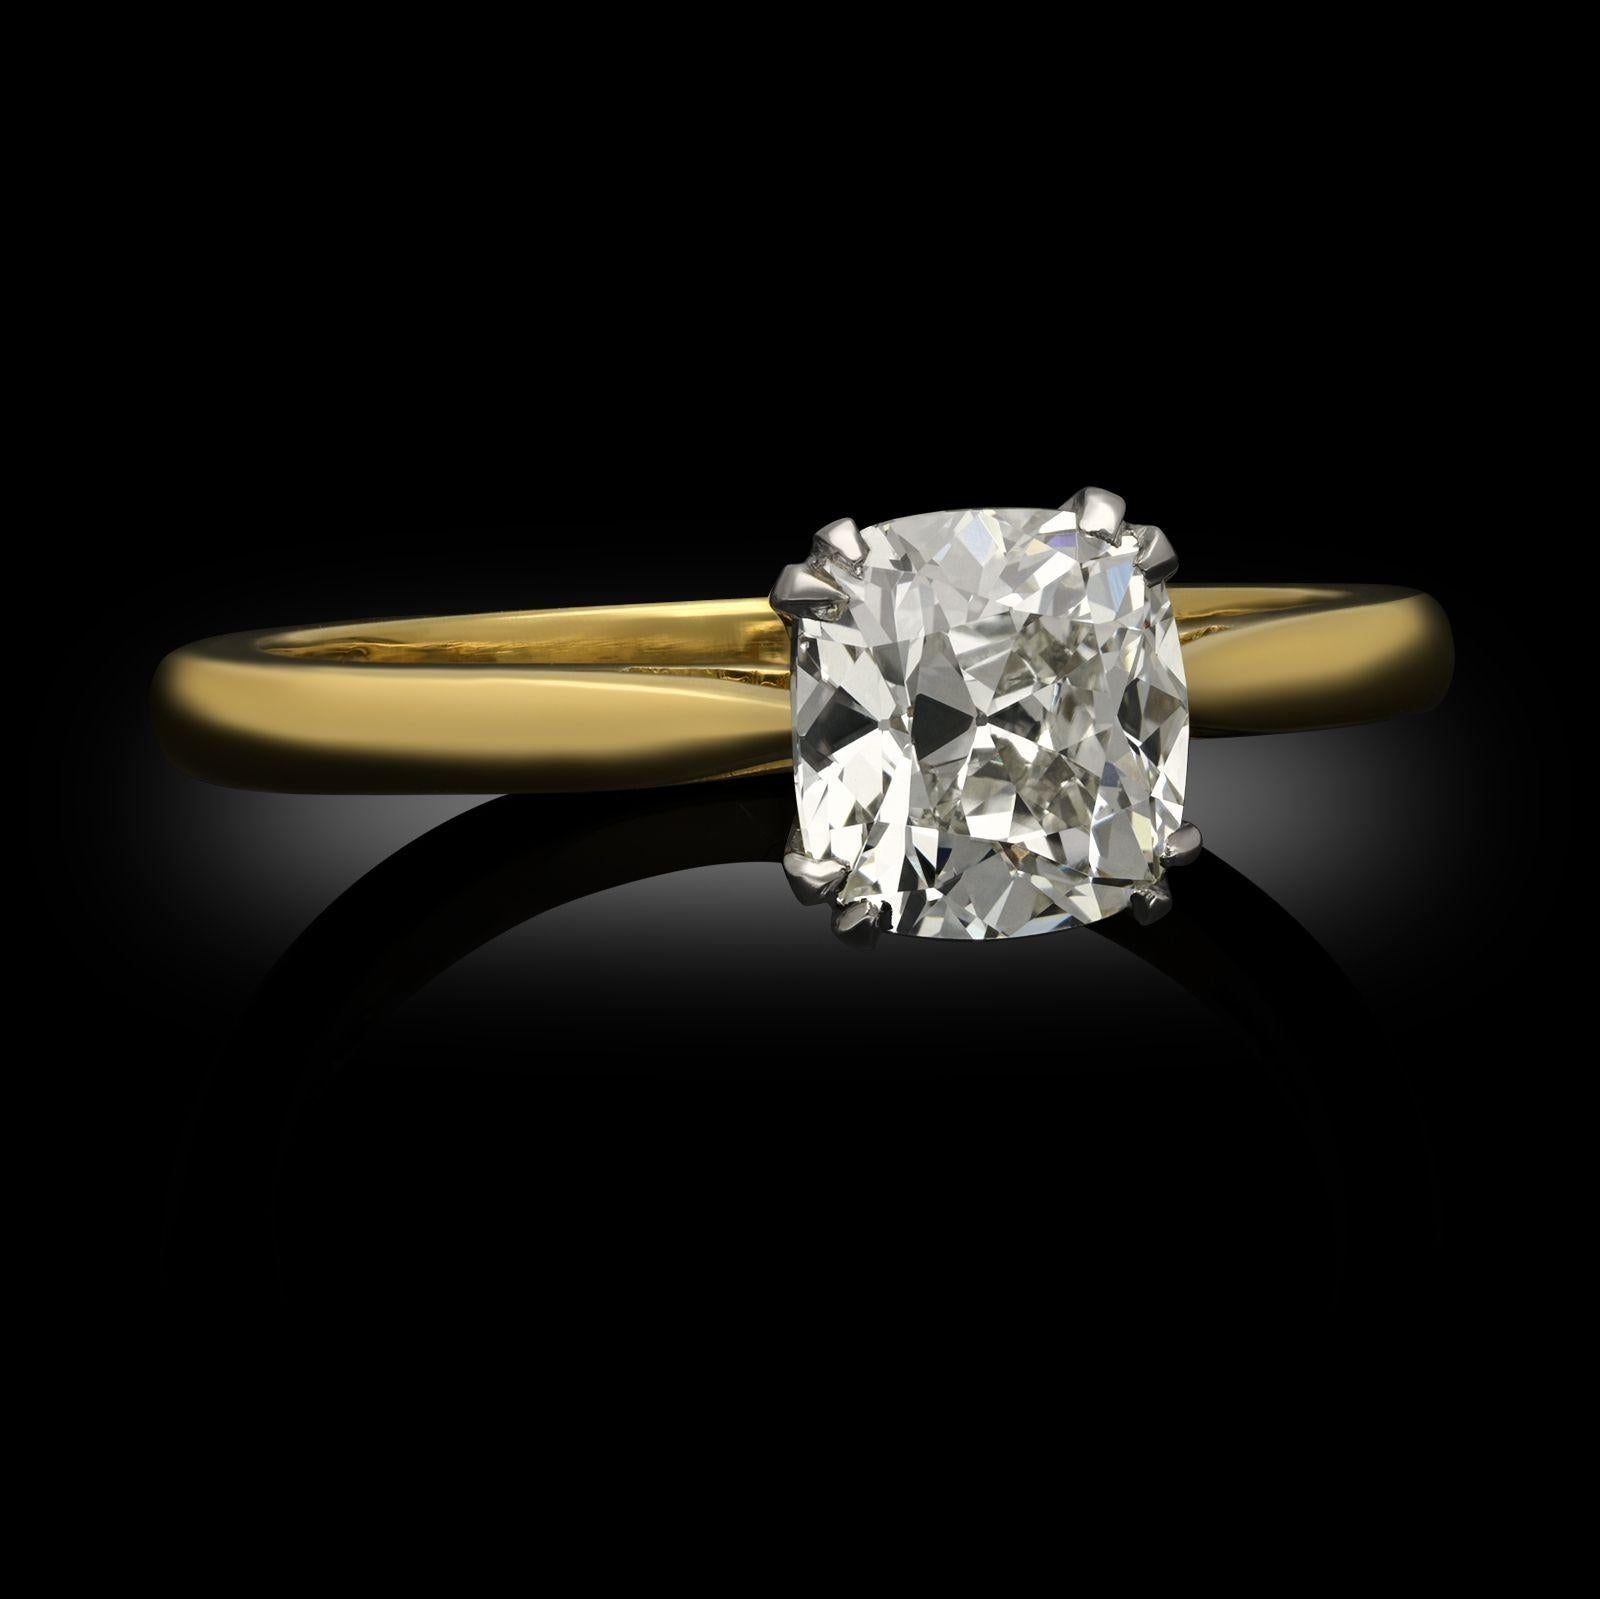 An old cut diamond and yellow gold solitaire ring by Hancocks. The ring is set with an old mine cushion cut diamond weighing 1.12ct, set with double claws in a scalloped platinum mount to a handcrafted 18ct yellow gold band with tapering shoulders